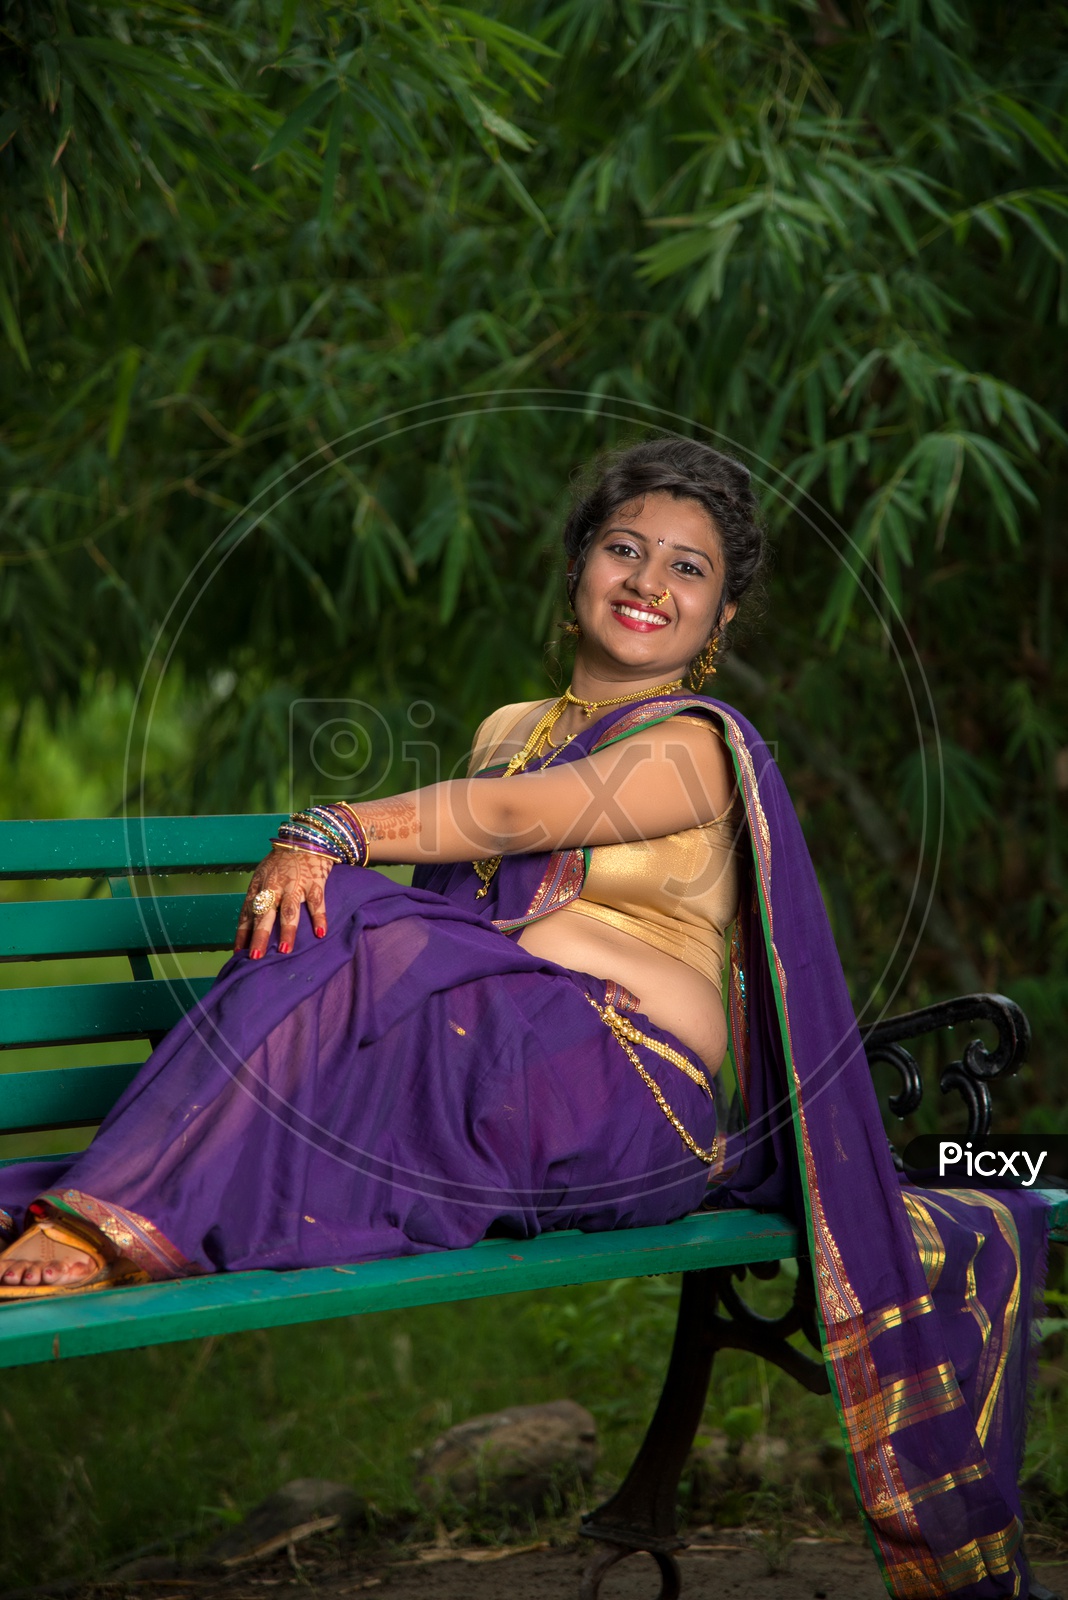 Sitting pose in indian sarees Stock Photos - Page 1 : Masterfile